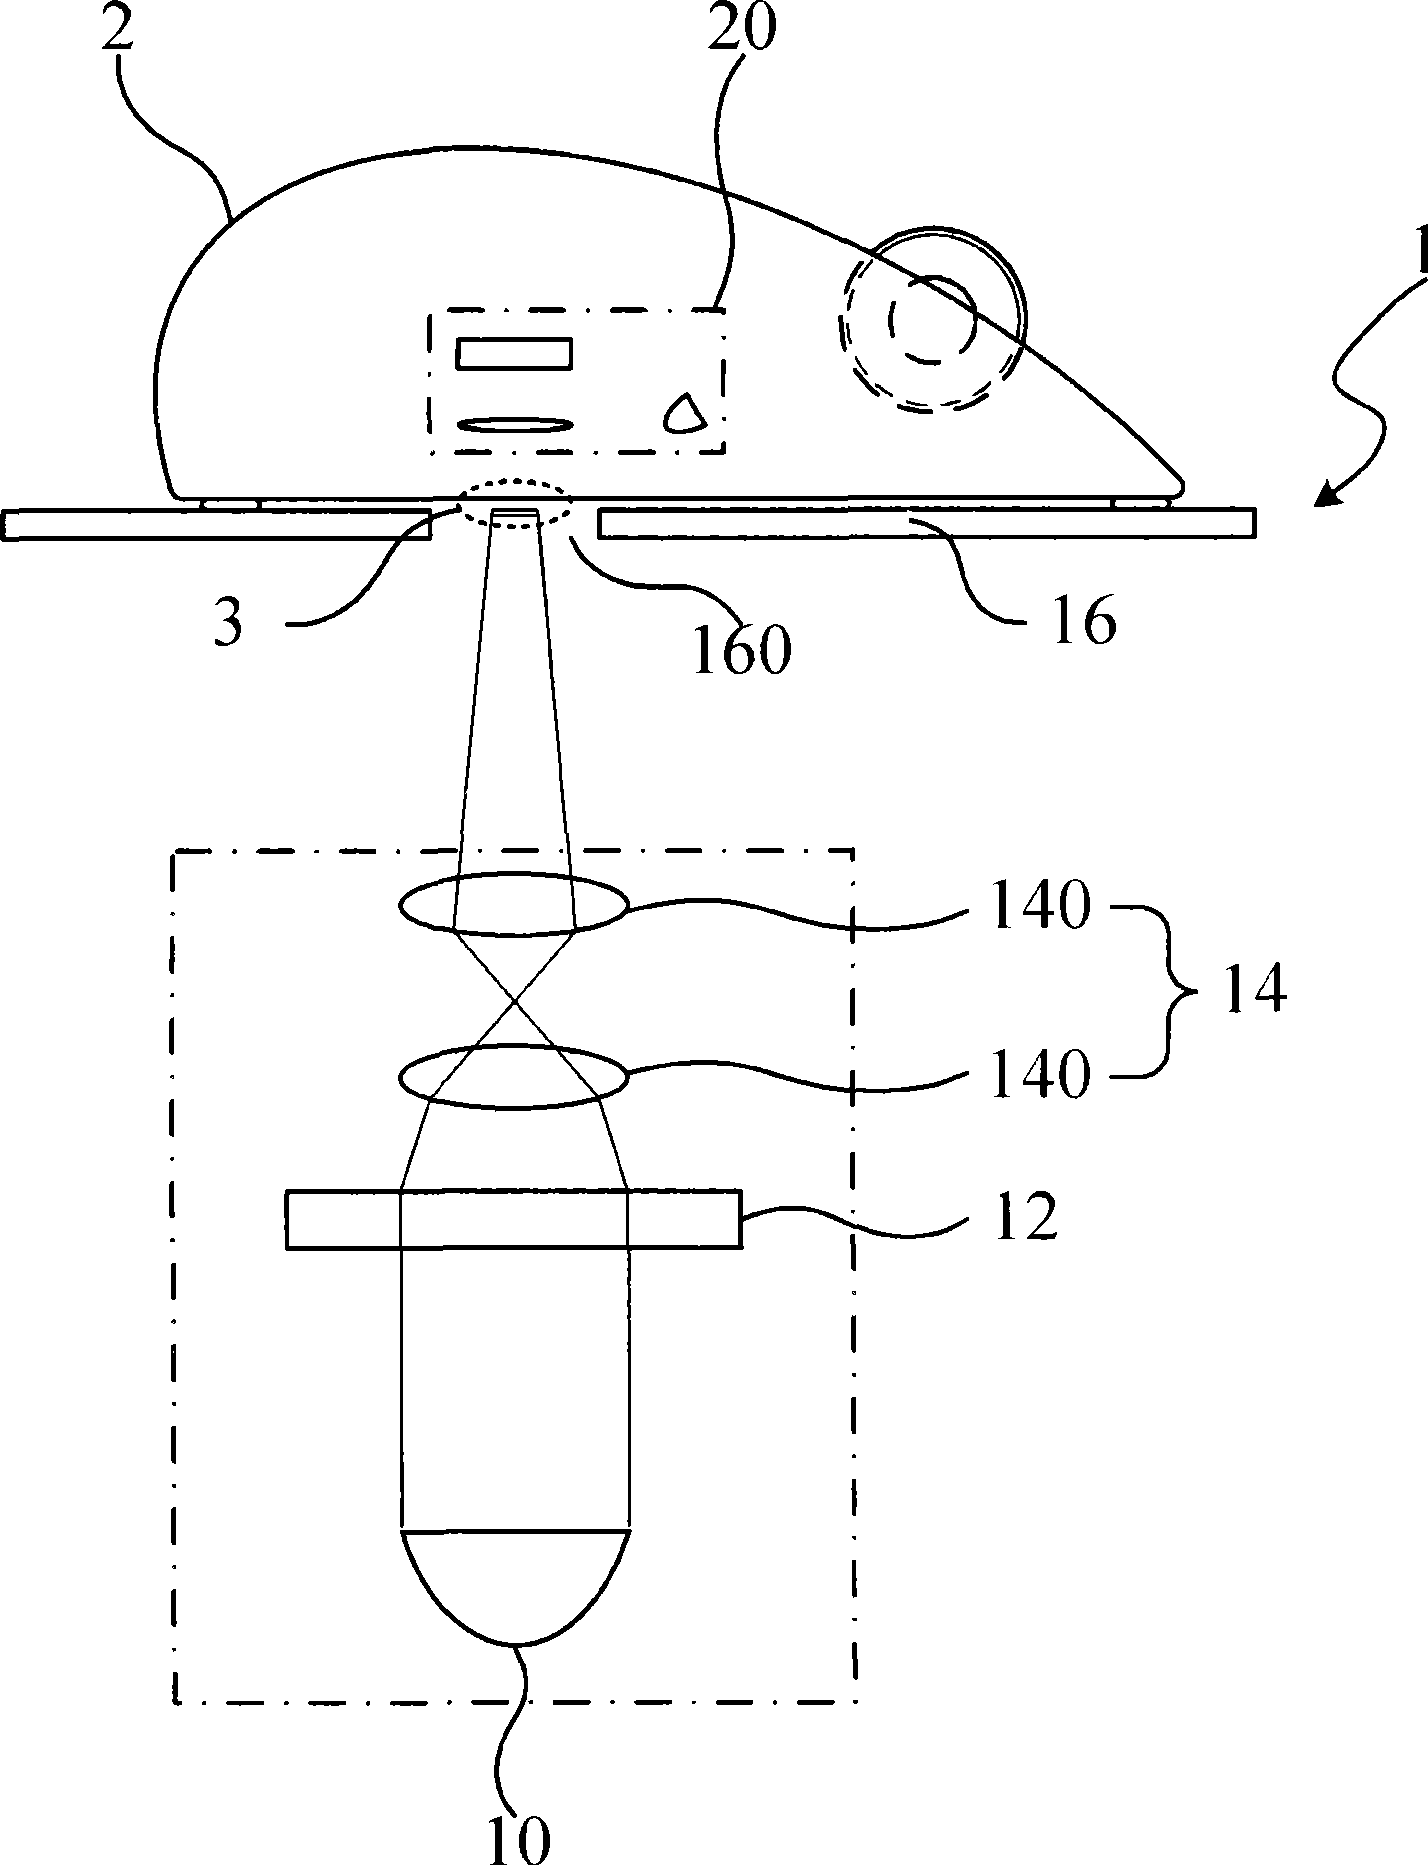 Detection device, system and method